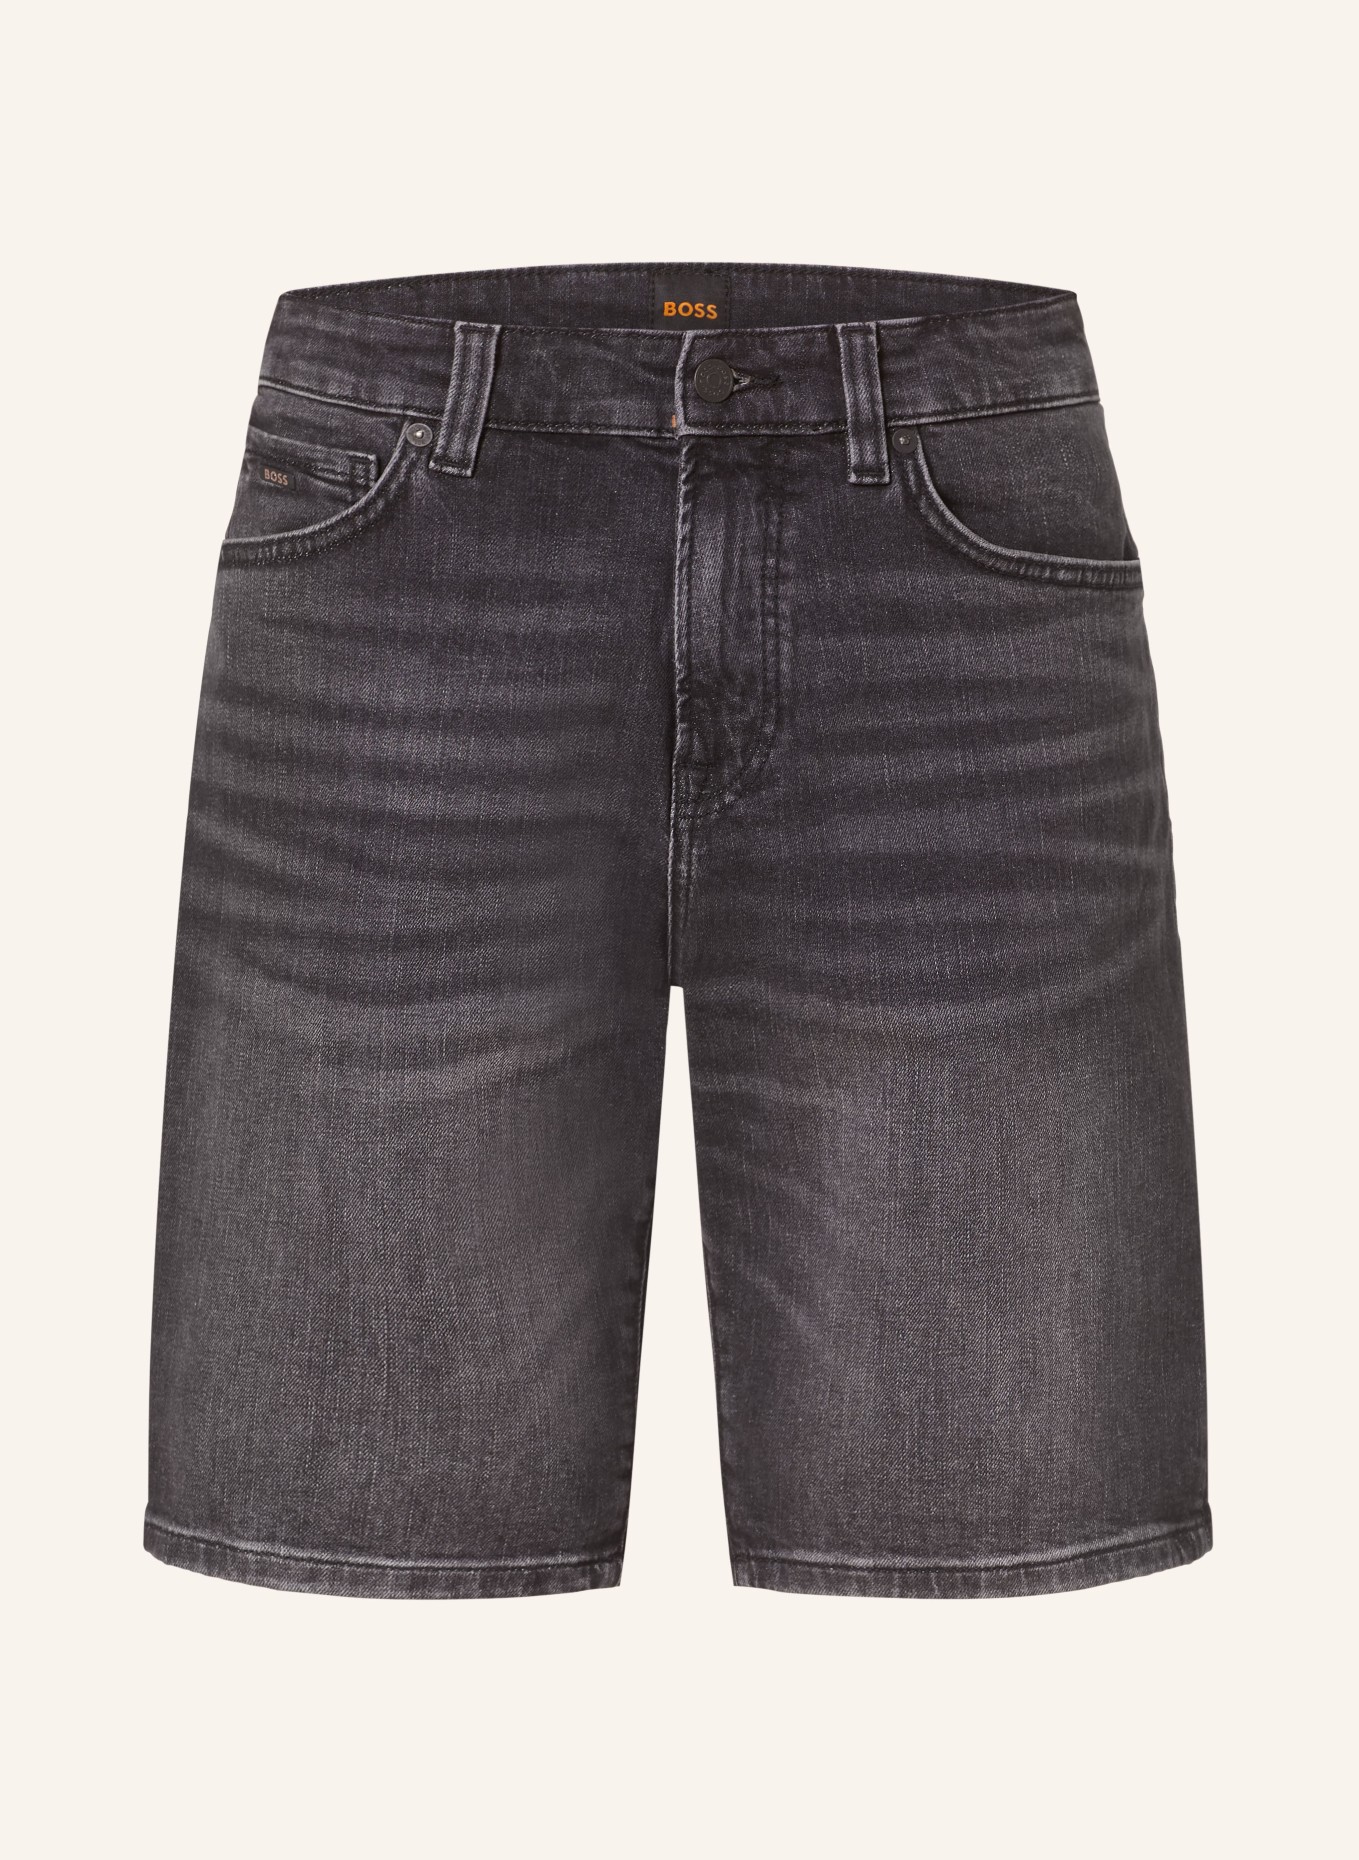 BOSS Jeansshorts REMAINE Regular Fit, Farbe: 019 CHARCOAL (Bild 1)